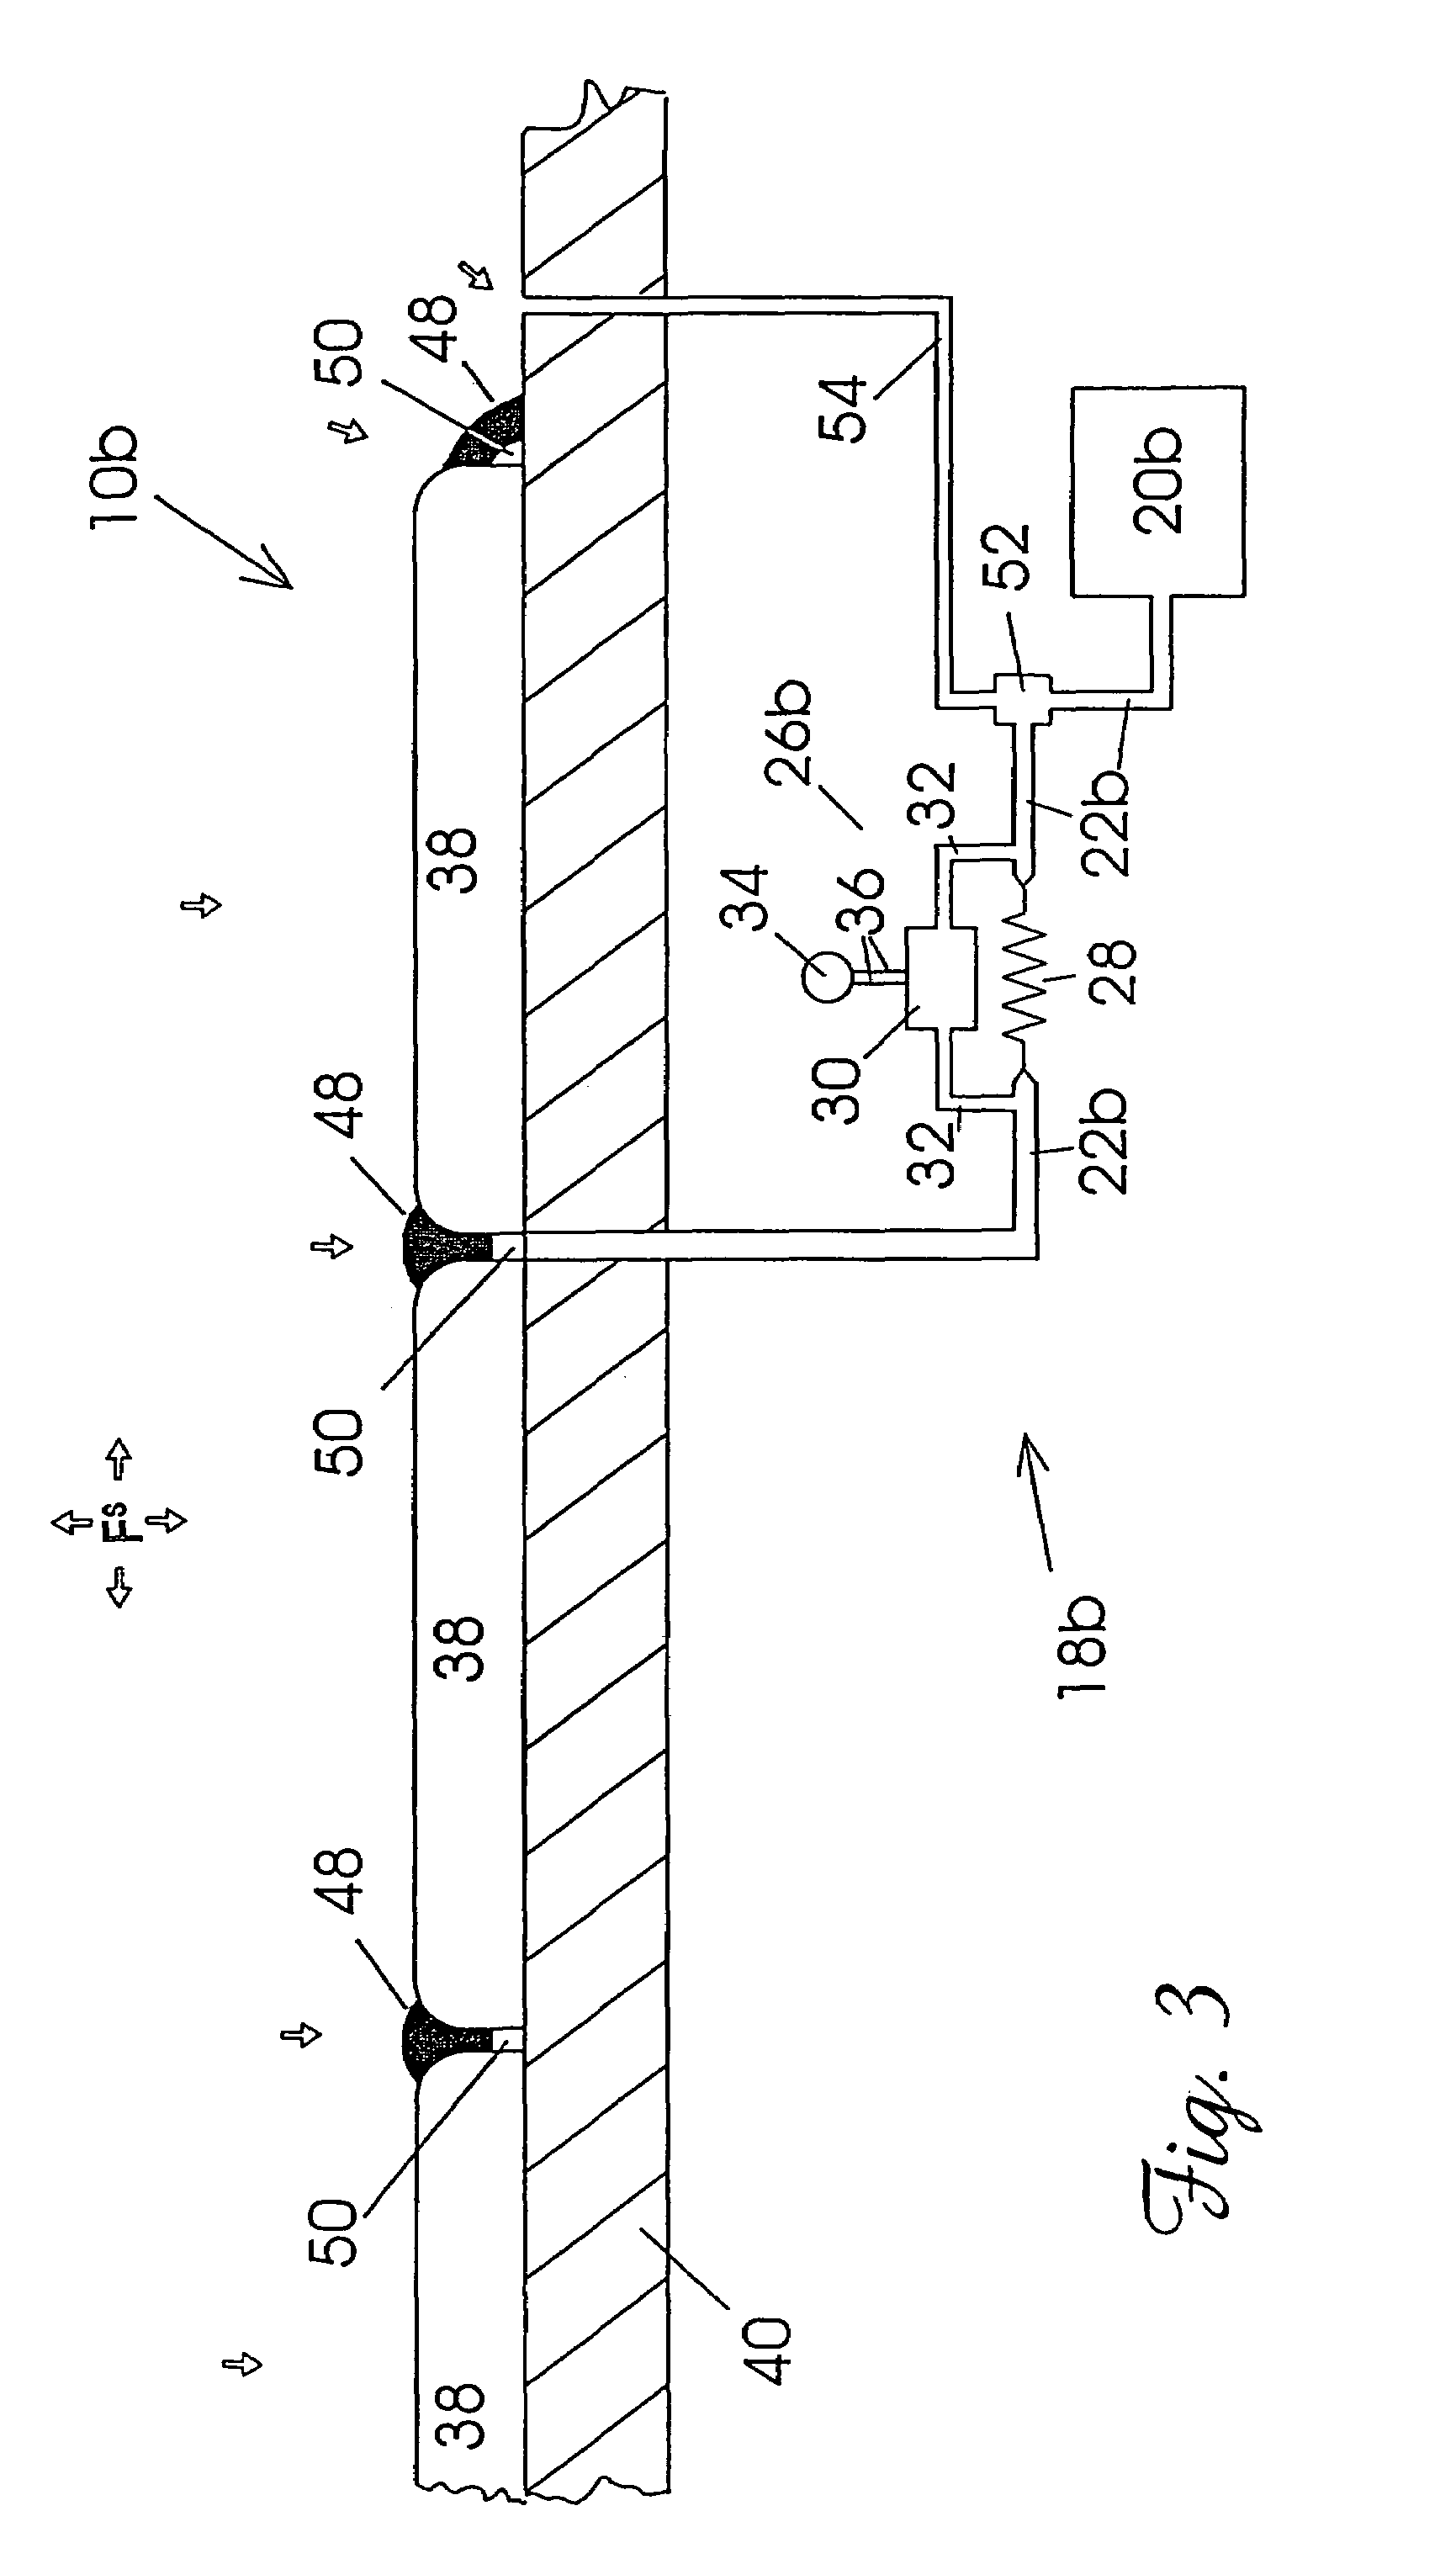 Method and apparatus for monitoring the integrity of components and structures